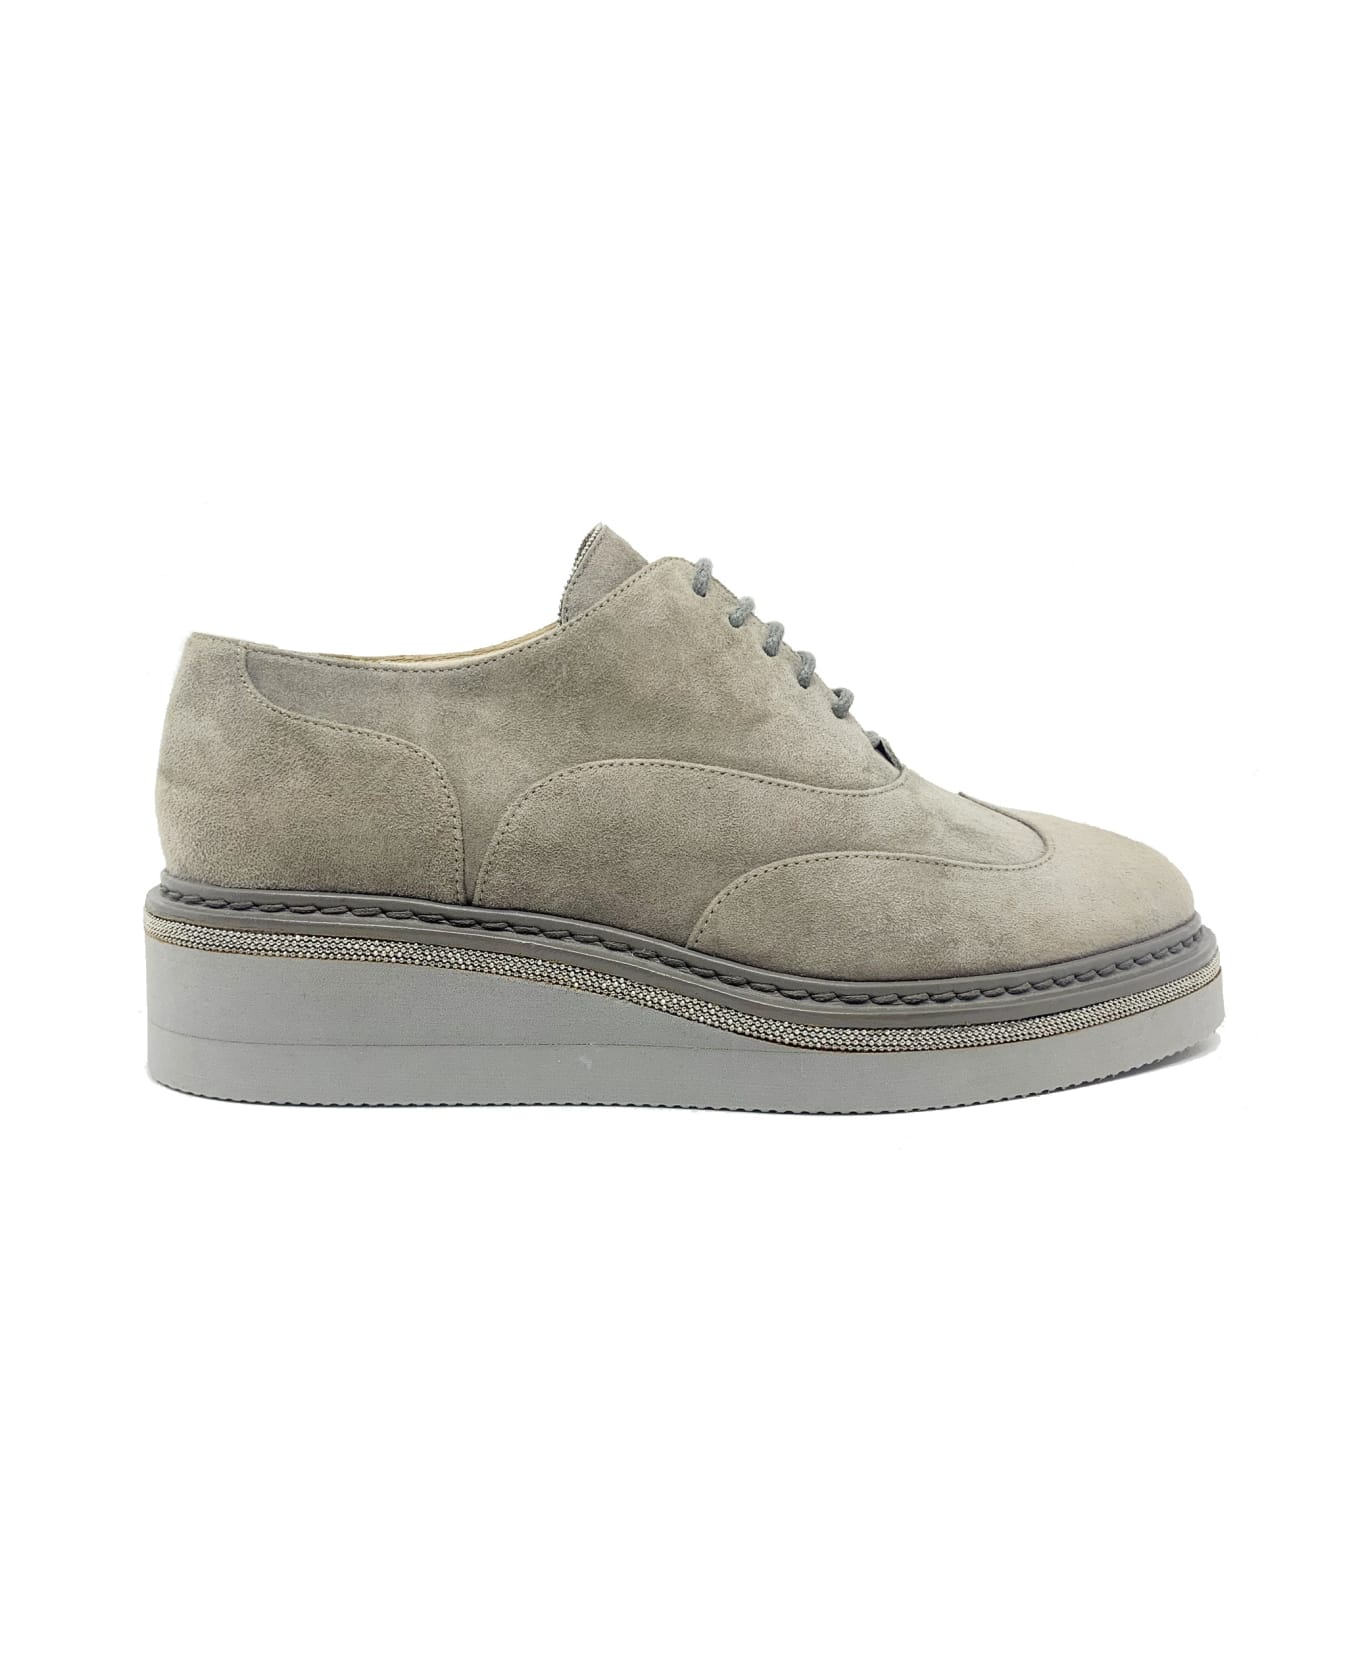 Fabiana Filippi Suede Lace-up Shoes - Gray